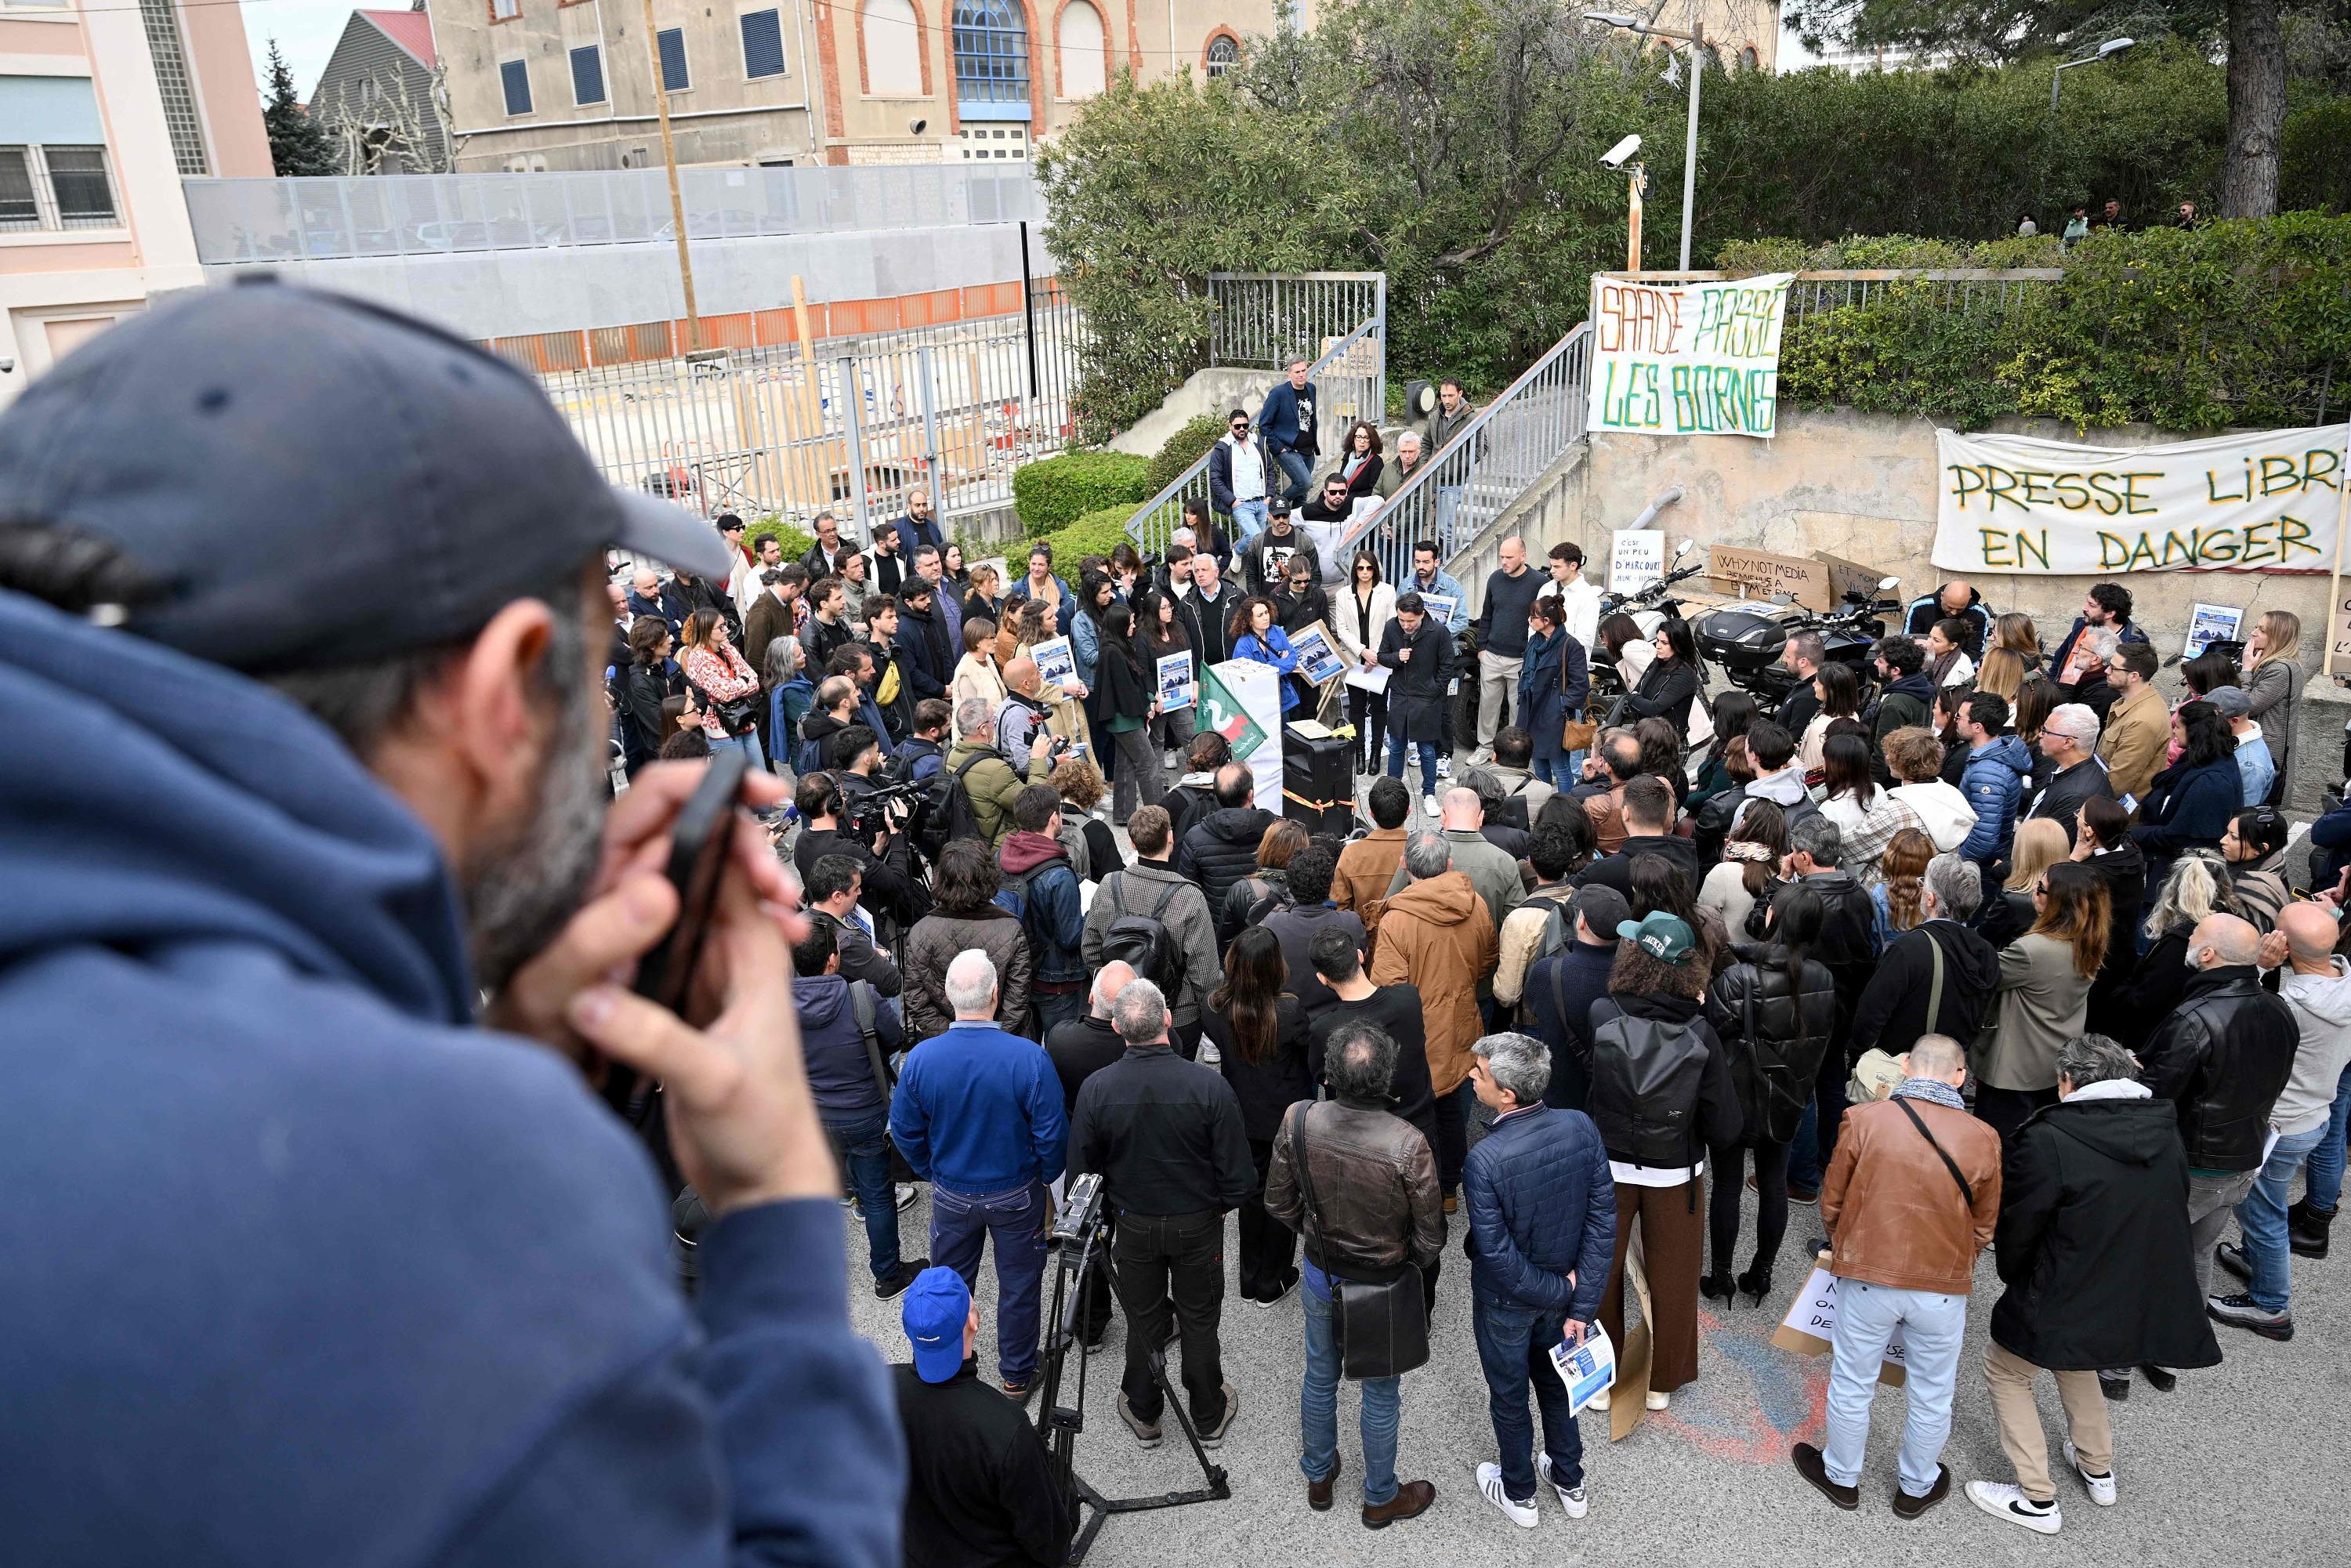 End of strike at La Provence after reinstatement of editorial director